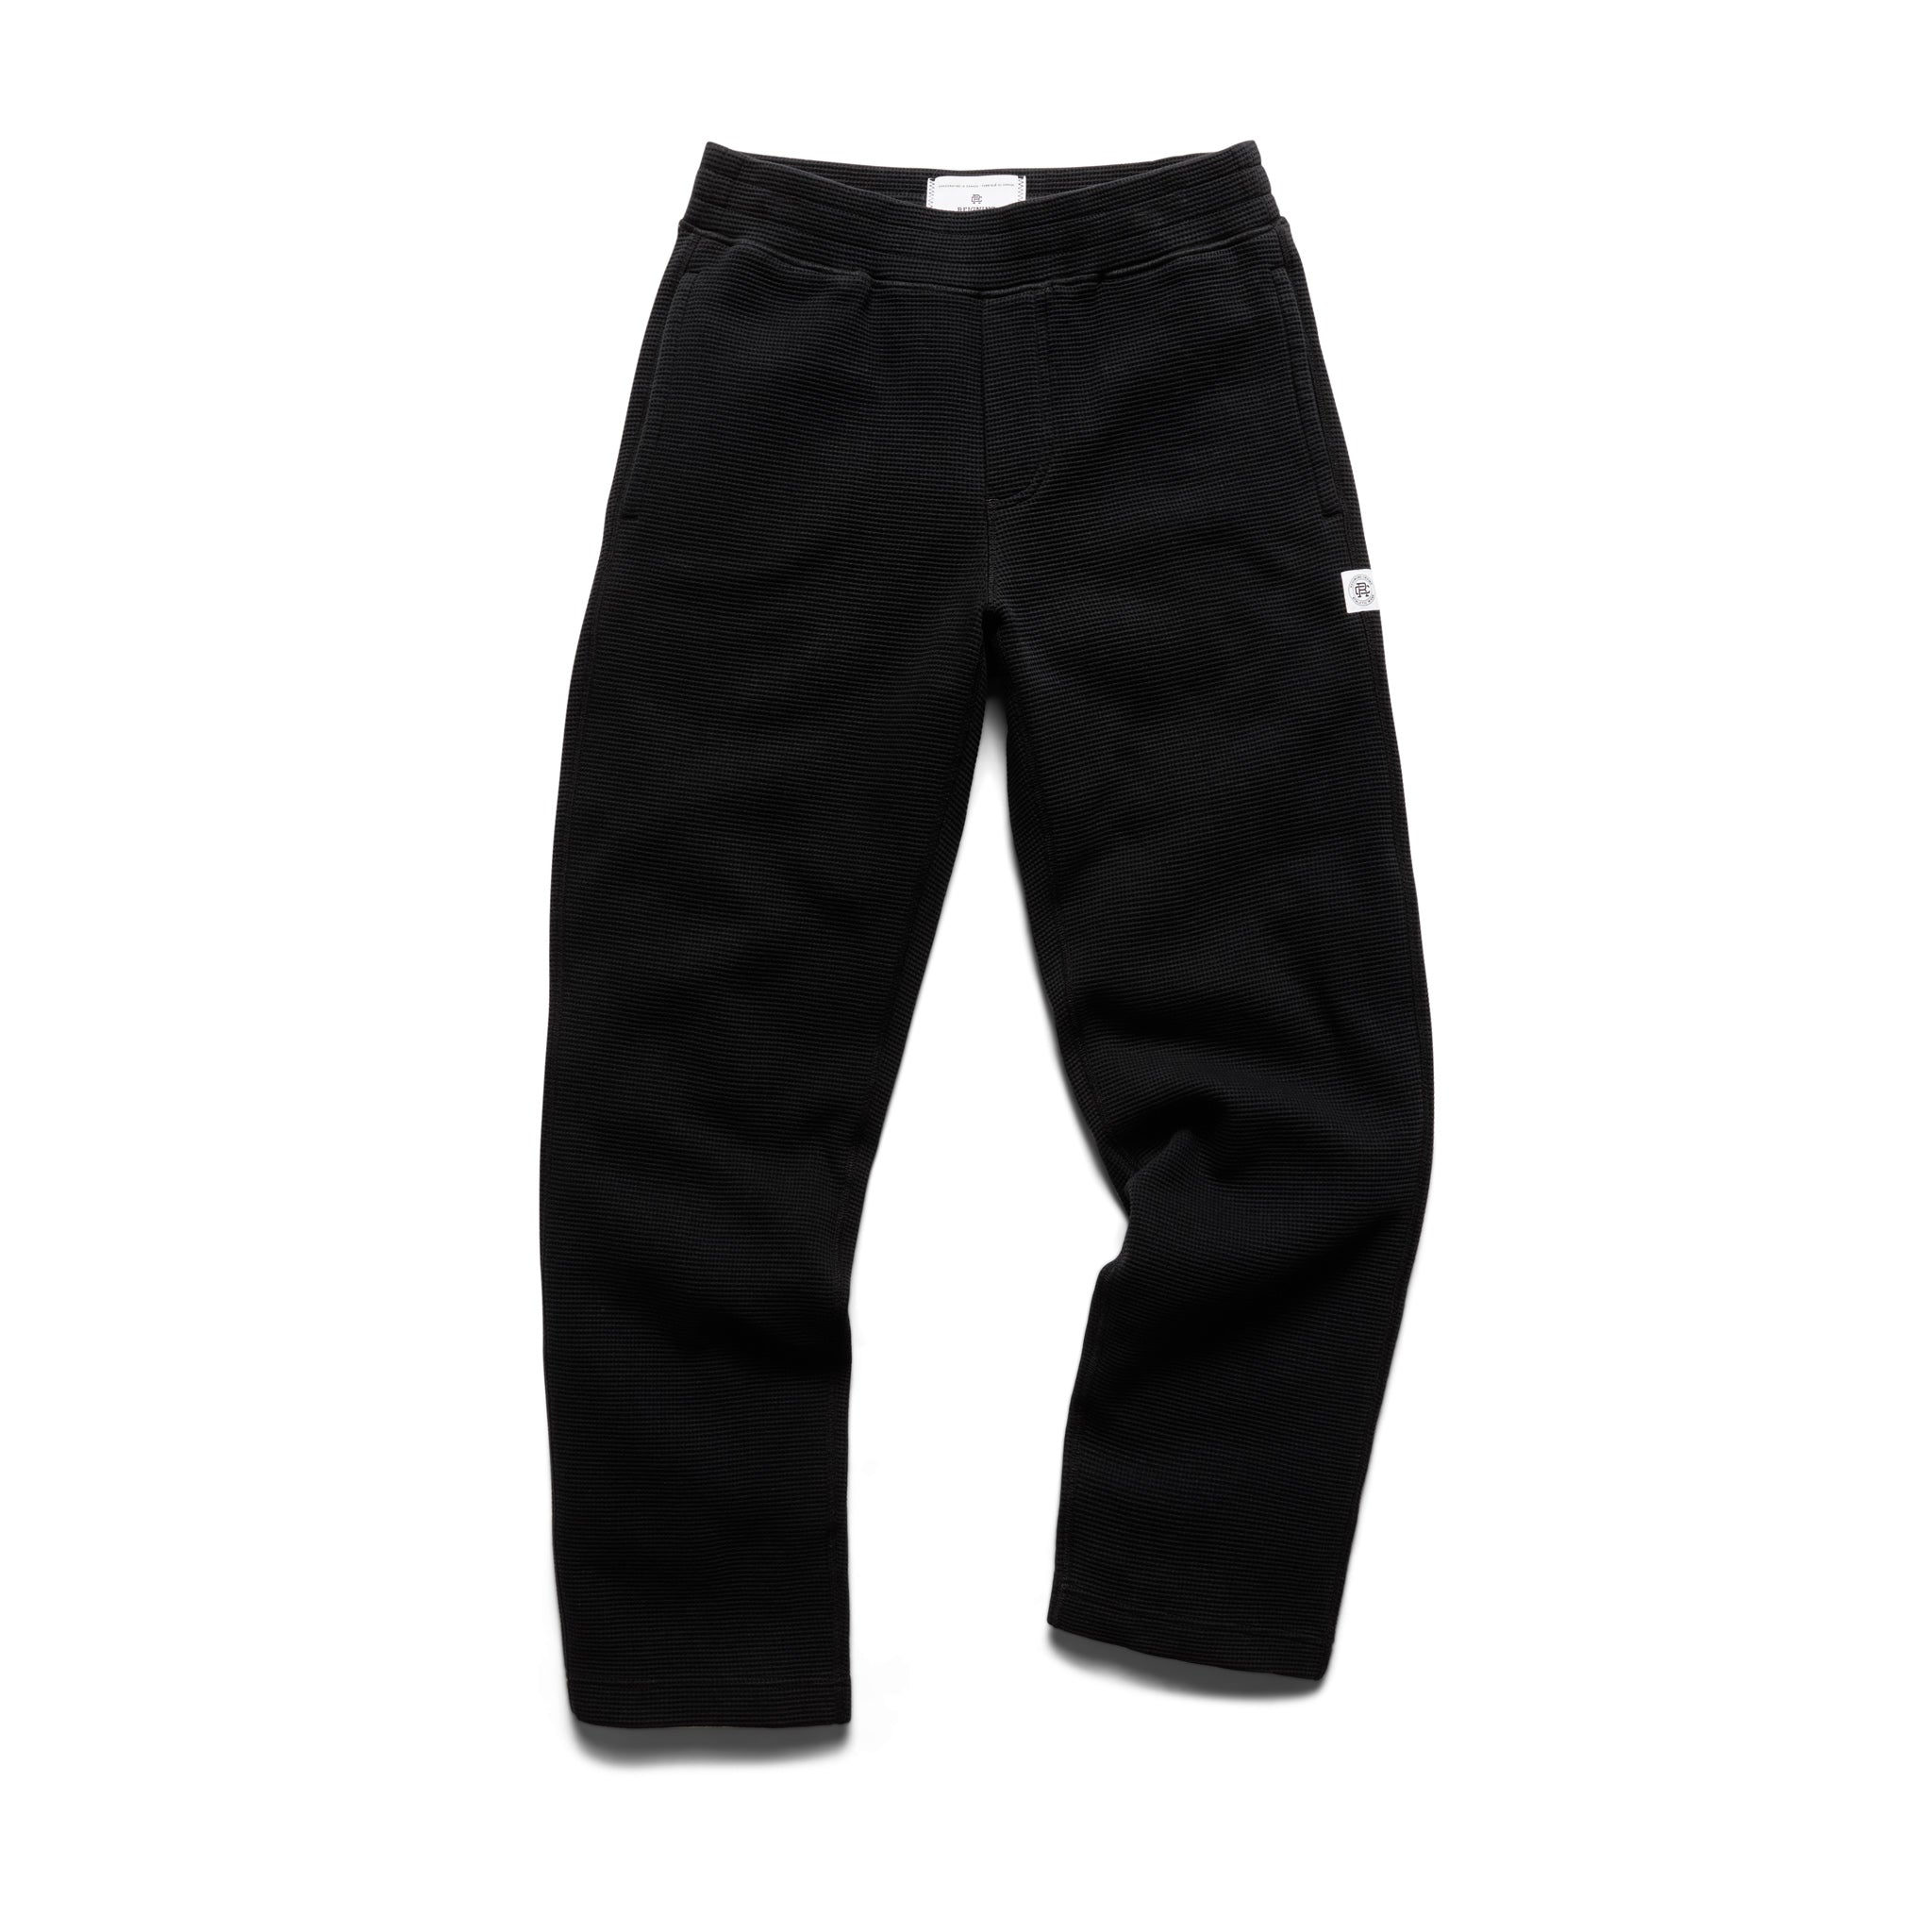 Flatback Thermal Pant | Reigning Champ